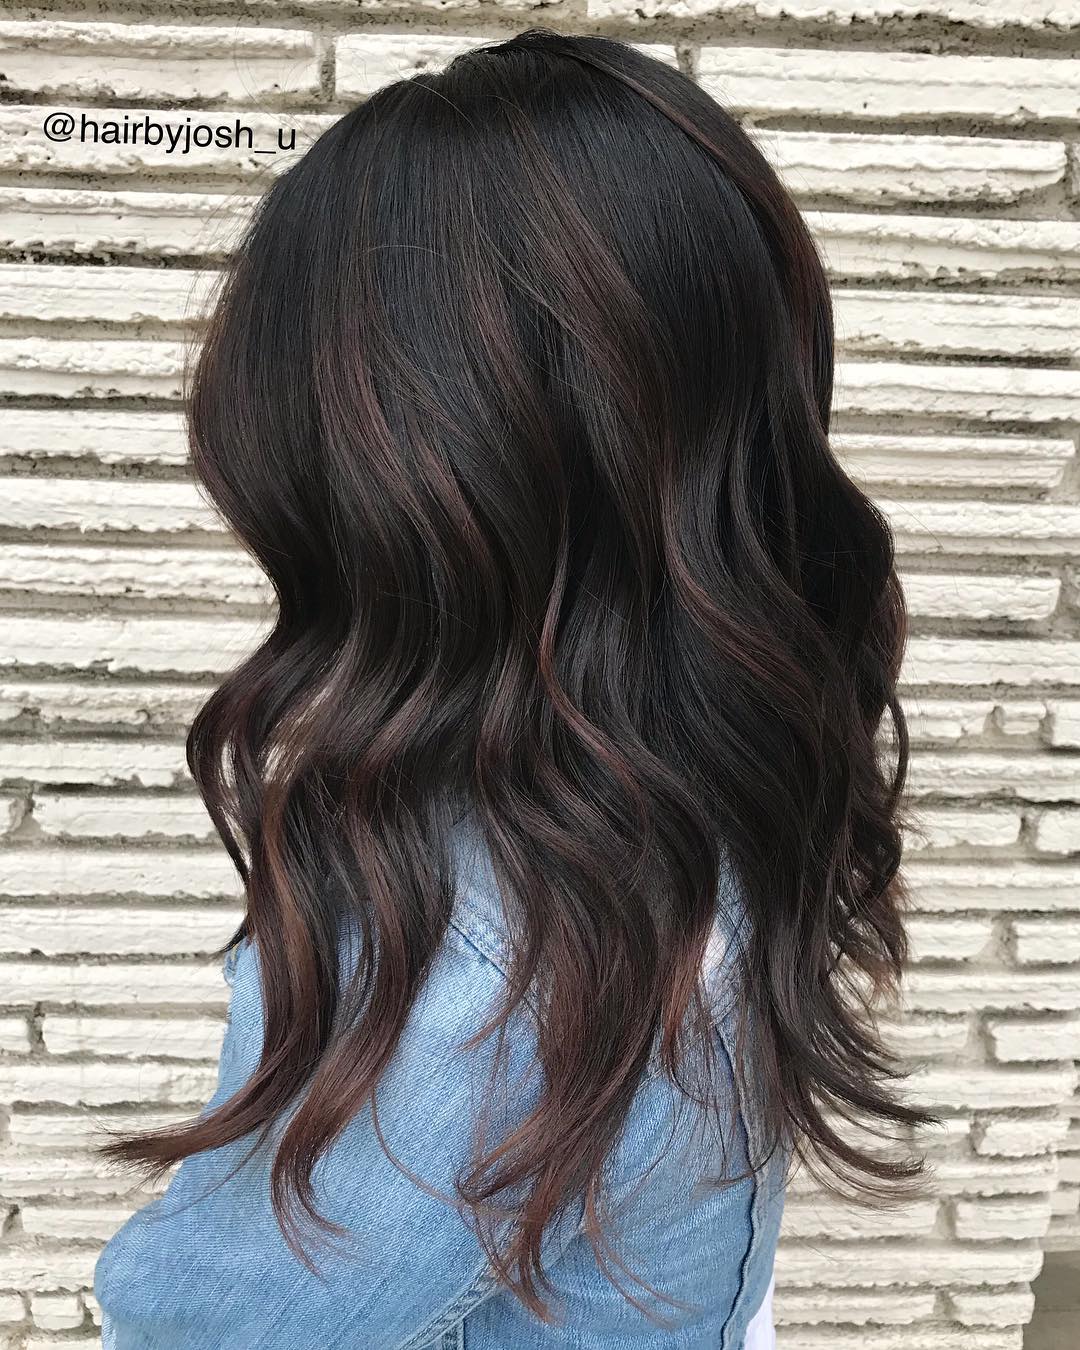 Black Hair with Subtle Brown Highlights